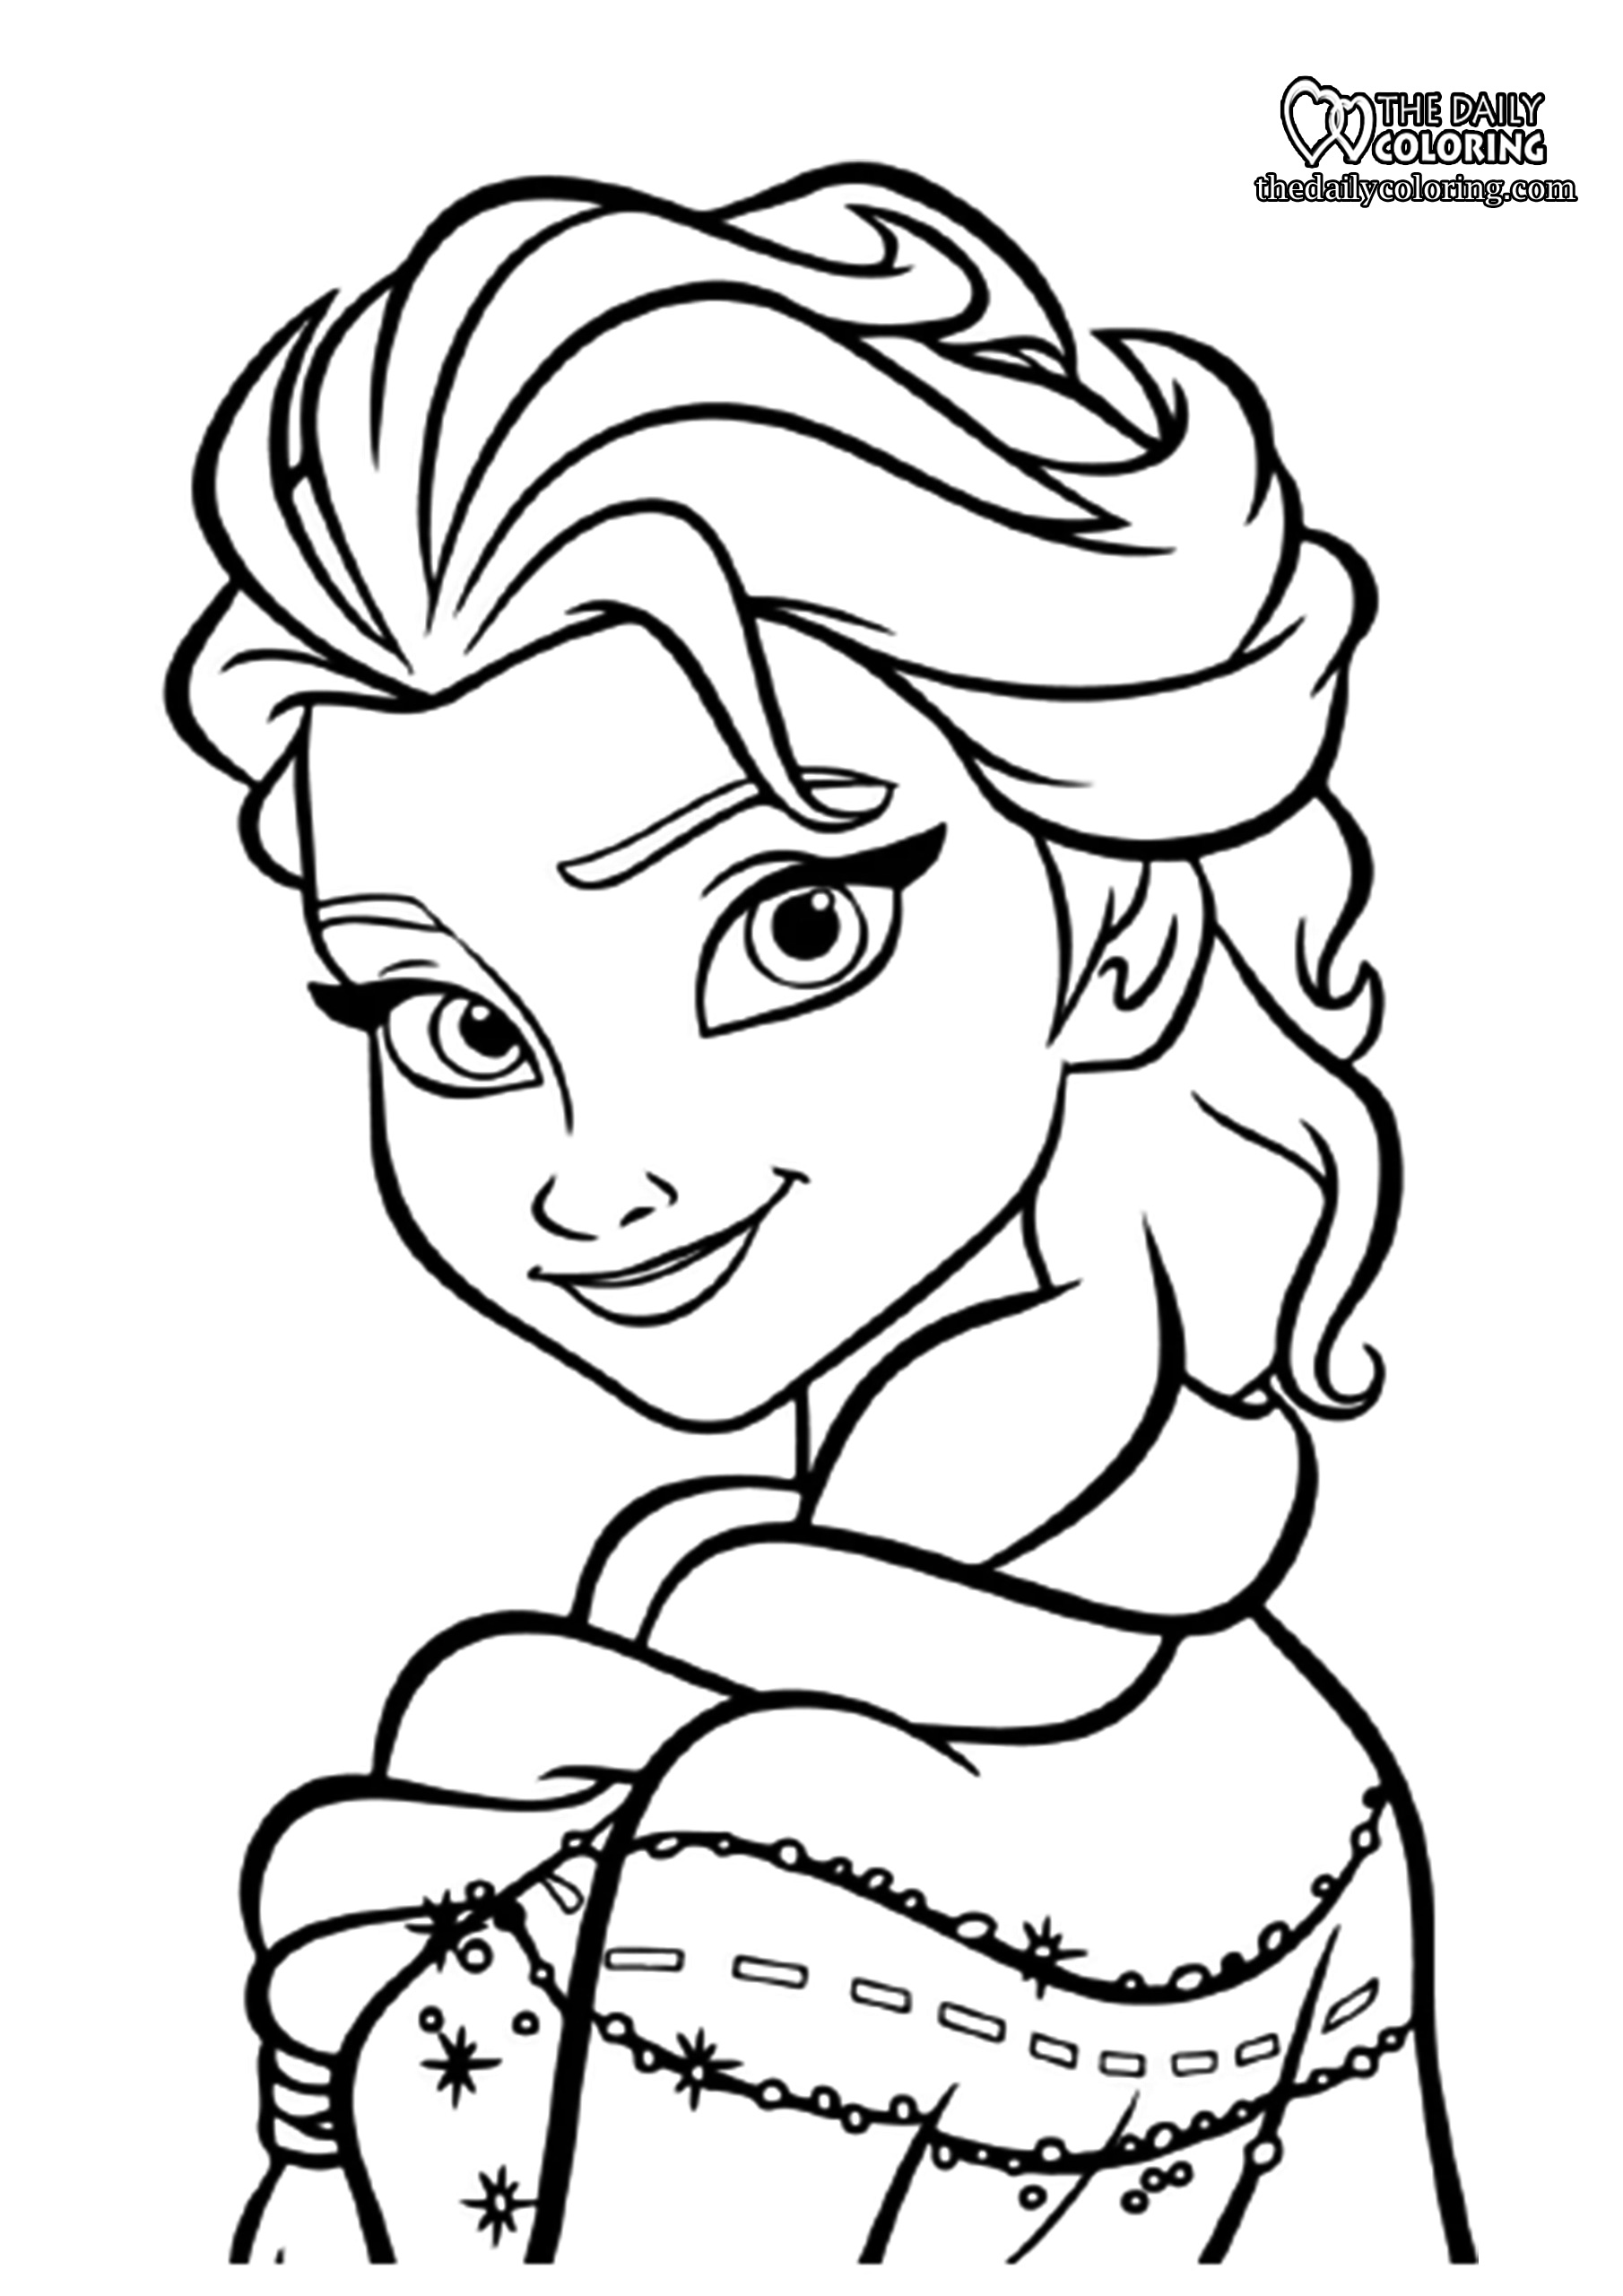 Elsa and Anna Coloring Pages [20 Pages]   The Daily Coloring